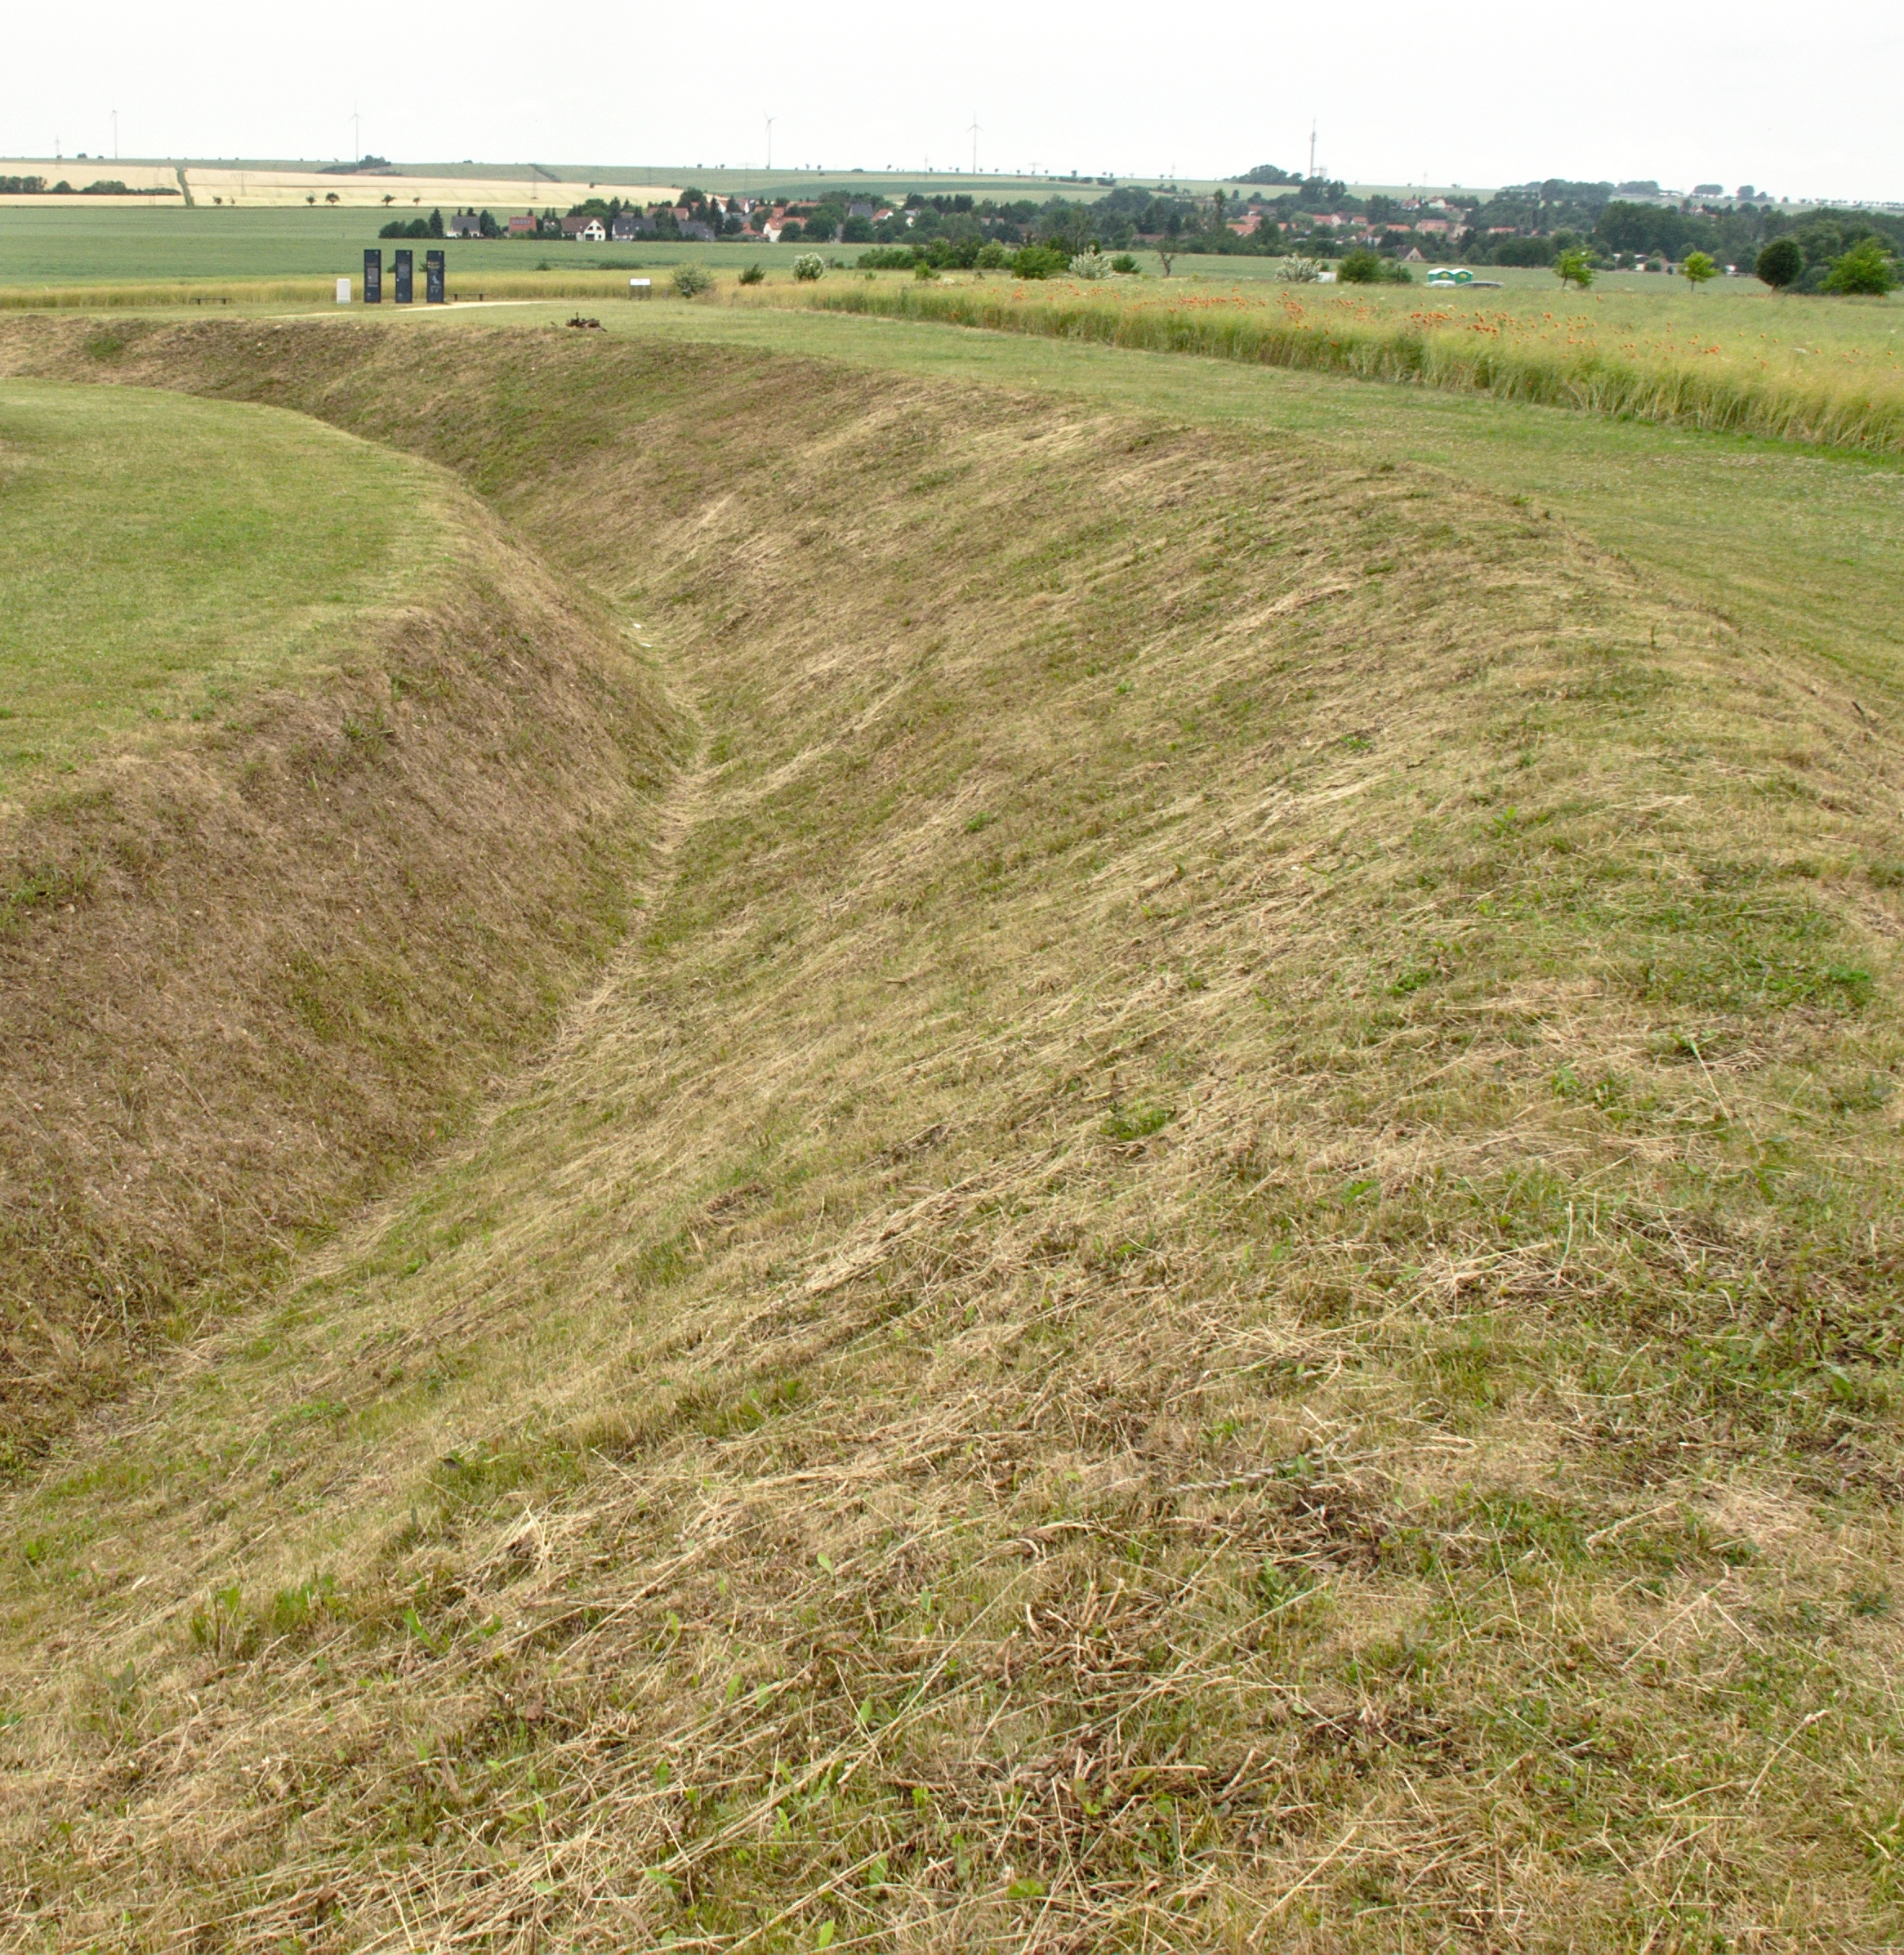 Neolithic ditches at European ditched enclosures - Perdigões